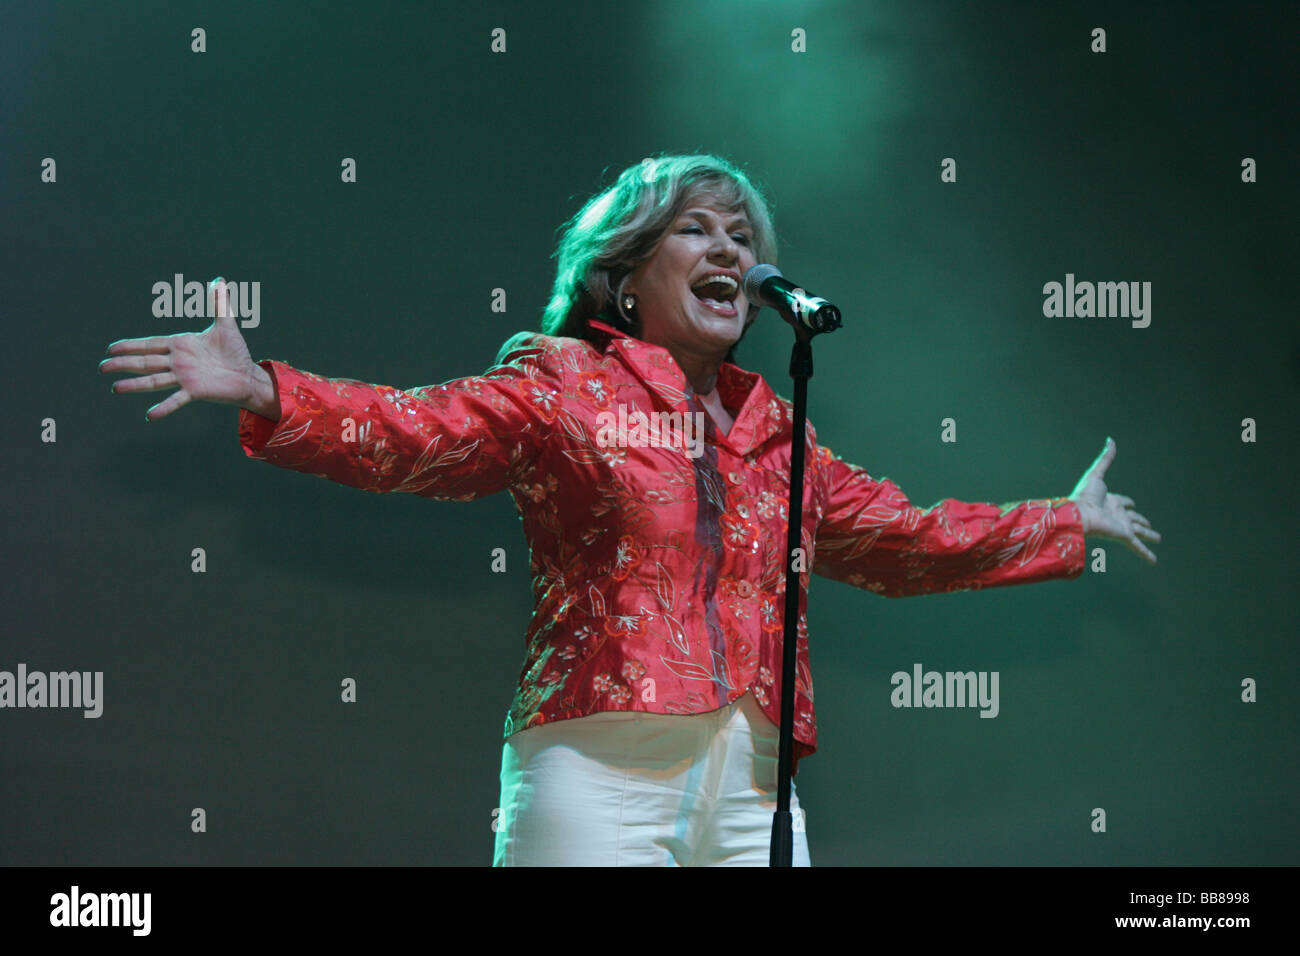 German schlager singer and actress Mary Roos performing live at Schlager-Nacht at Festhalle Allmend concert hall, Lucerne, Swit Stock Photo